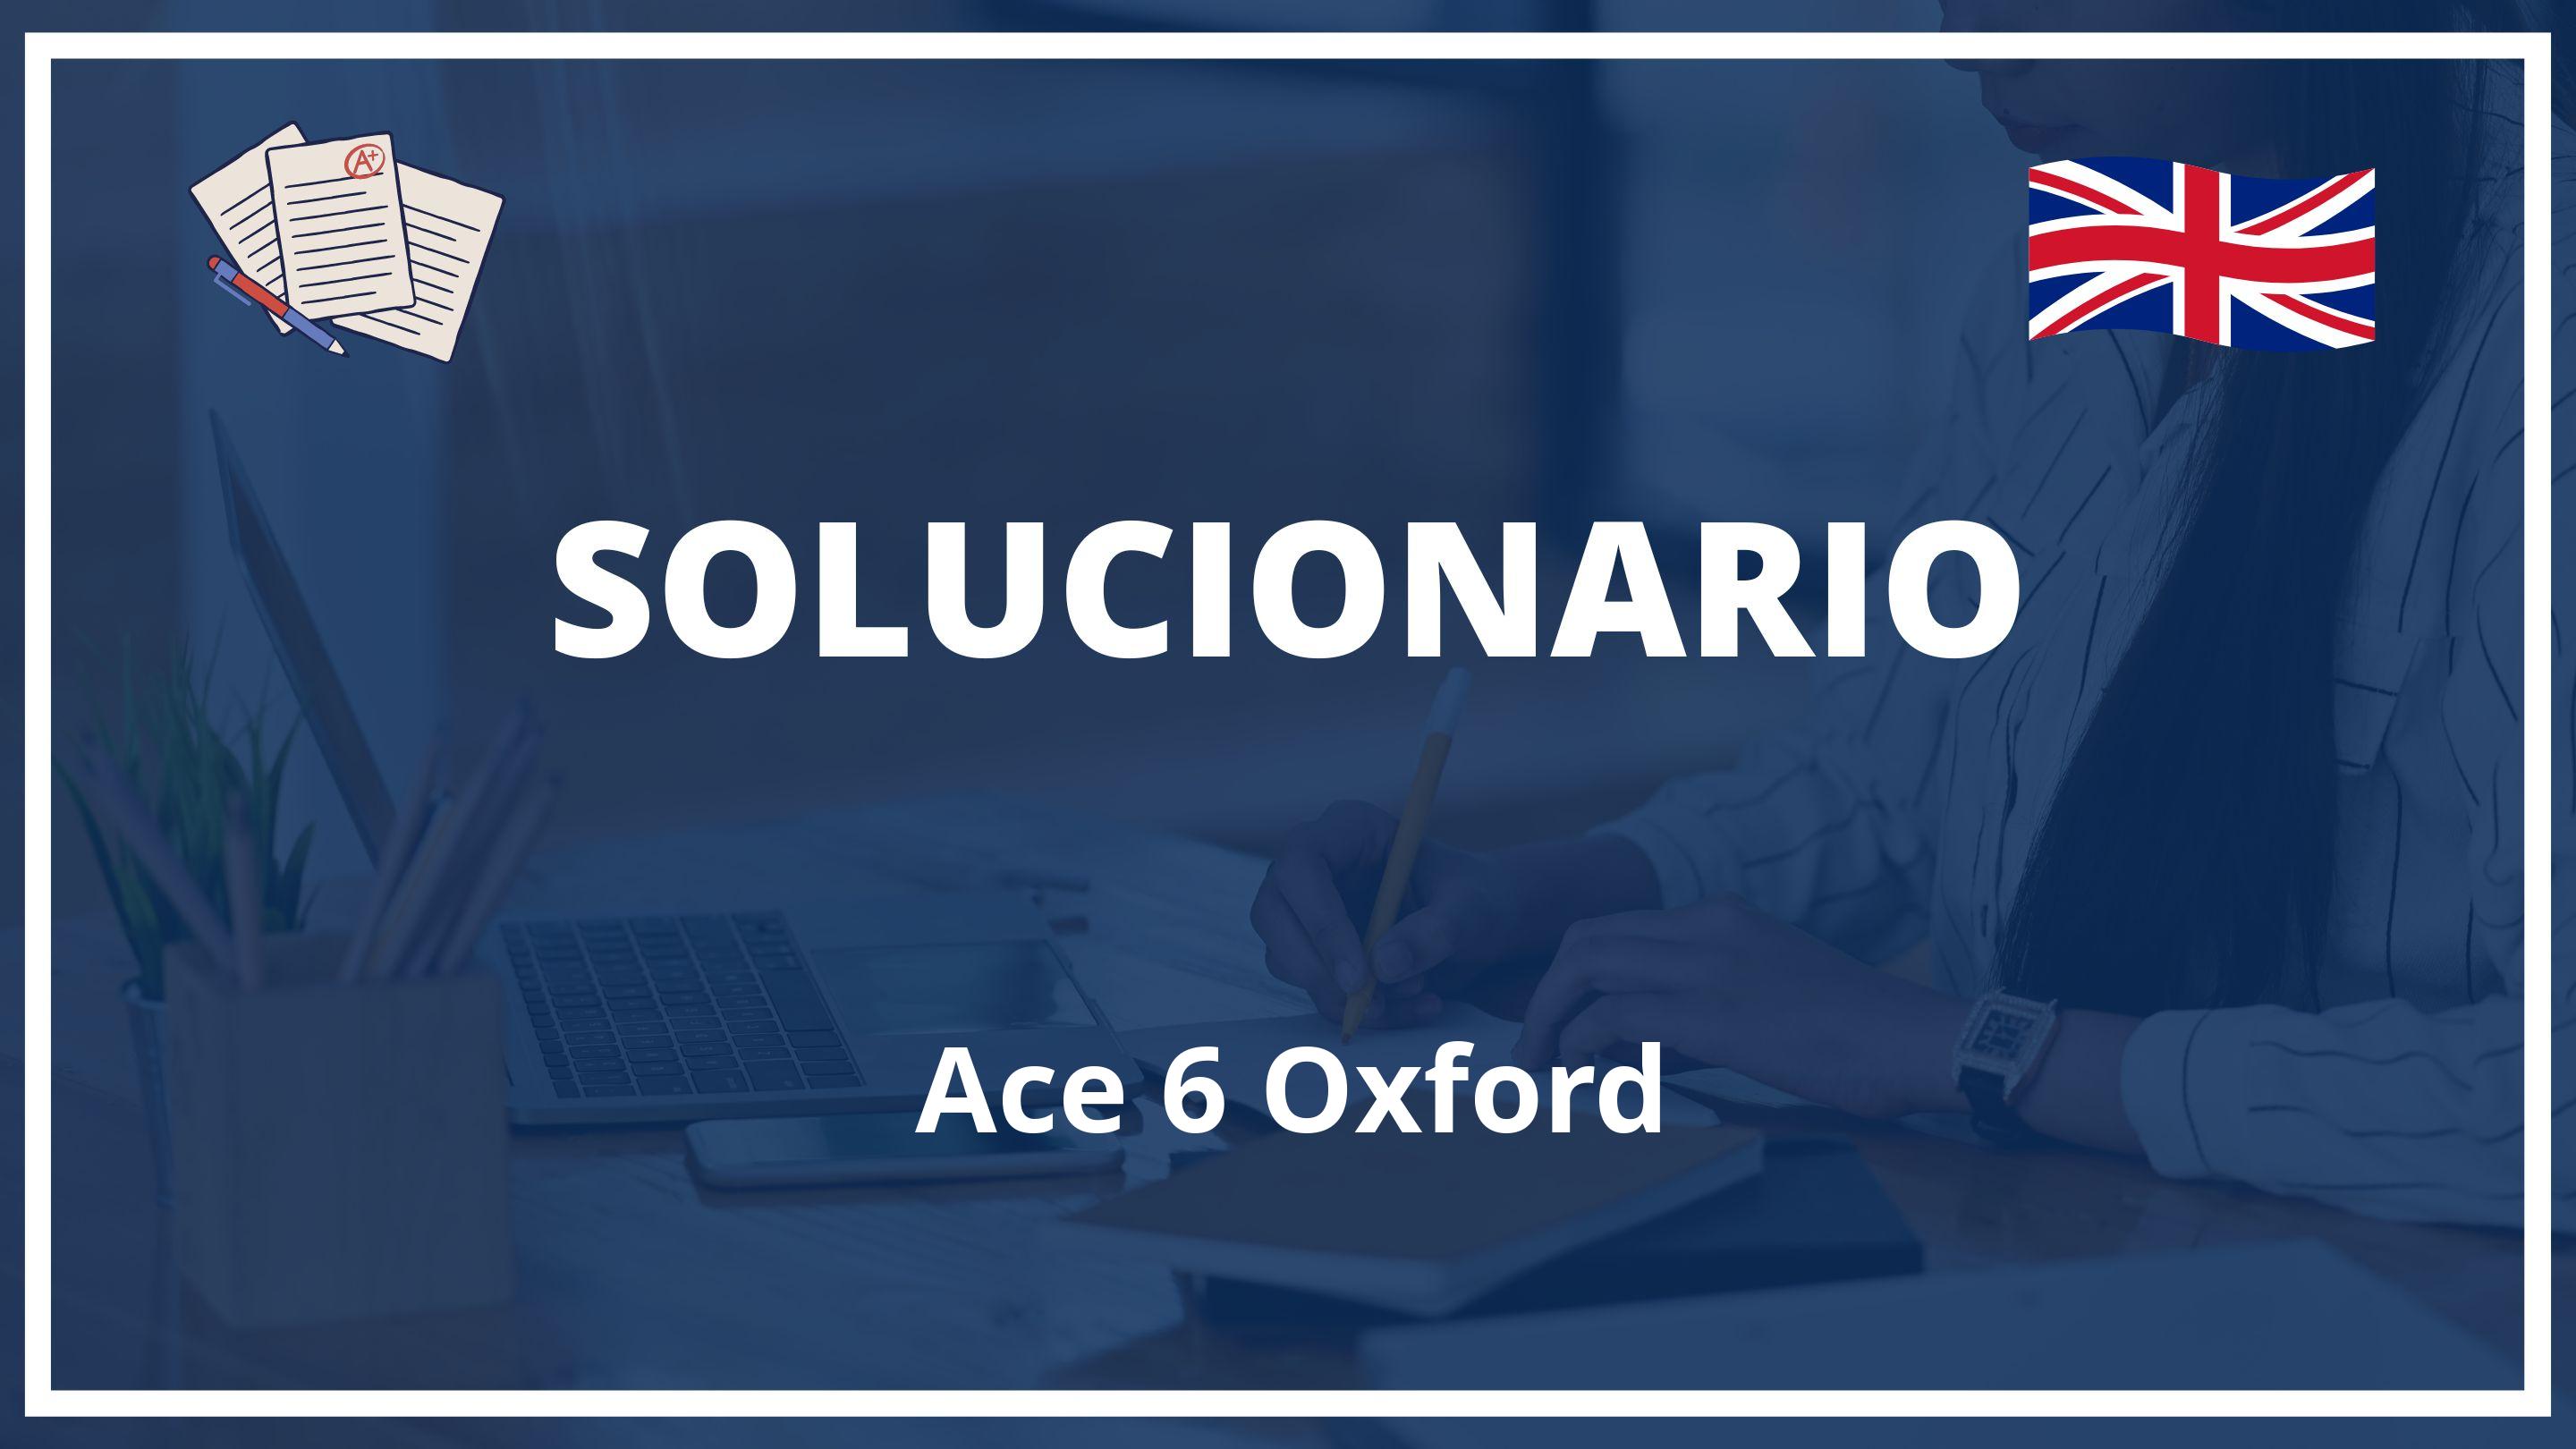 Ace 6 Oxford